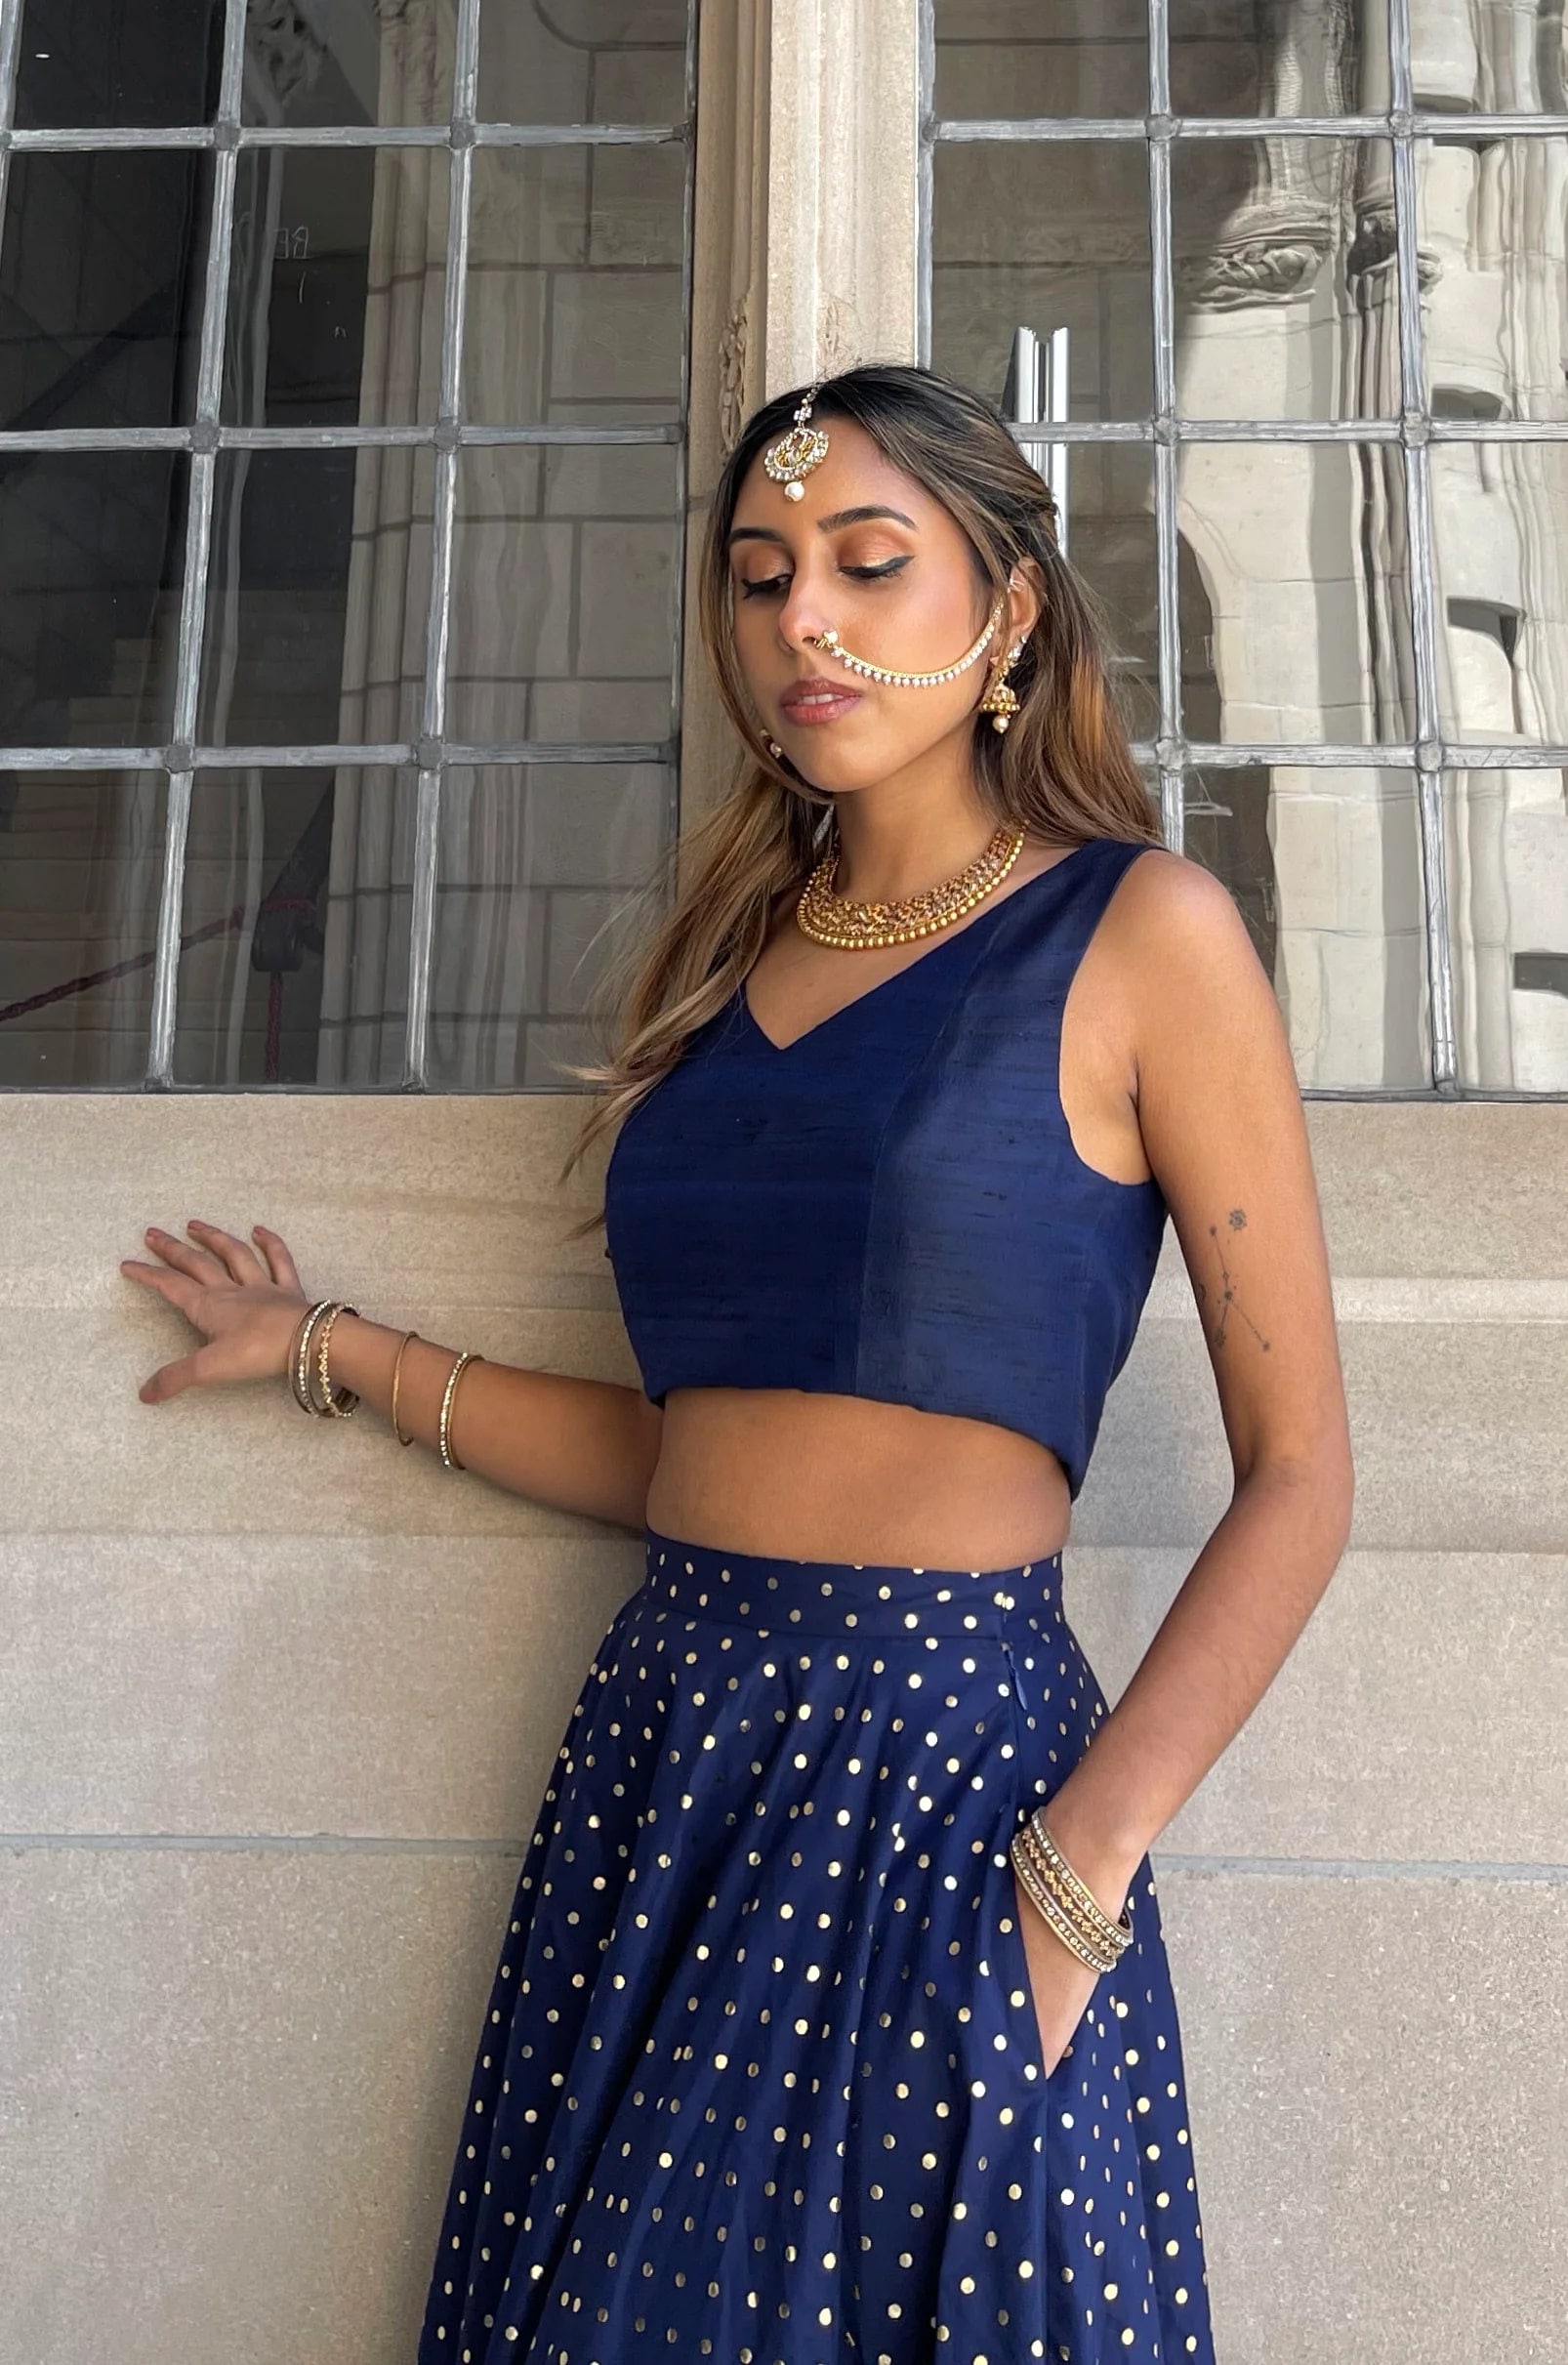 STRAPPY CROP TOP Vintage Style Sweetheart Neck Crop Top in Navy Blue.  Womens Strappy Cropped Top. Summer/festival/beach Tops for Women 